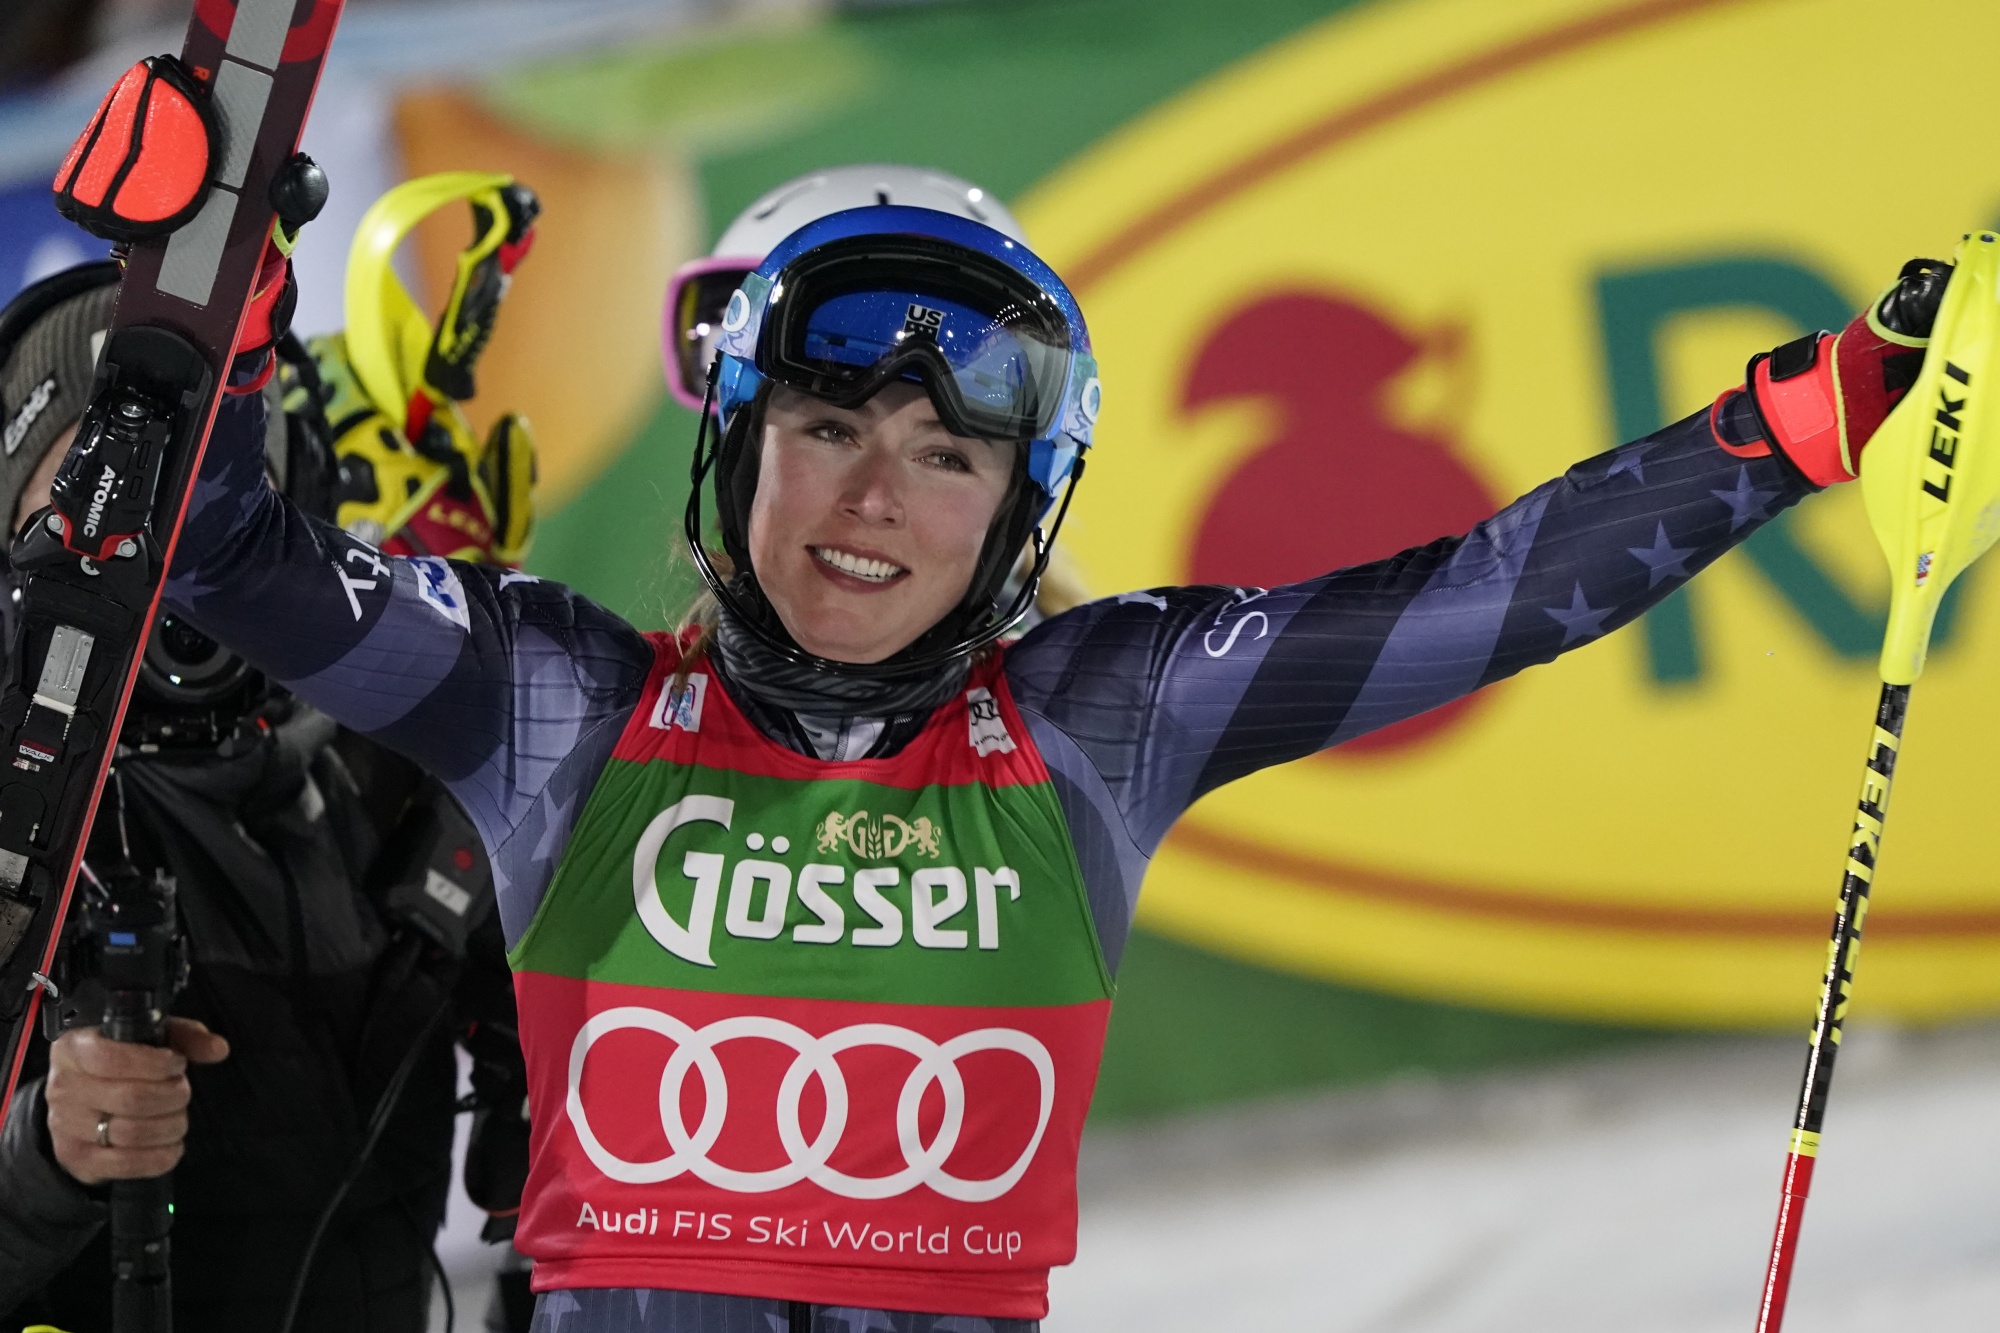 Skier Shiffrin Enters New Dimension With 50th Slalom Win - Bloomberg